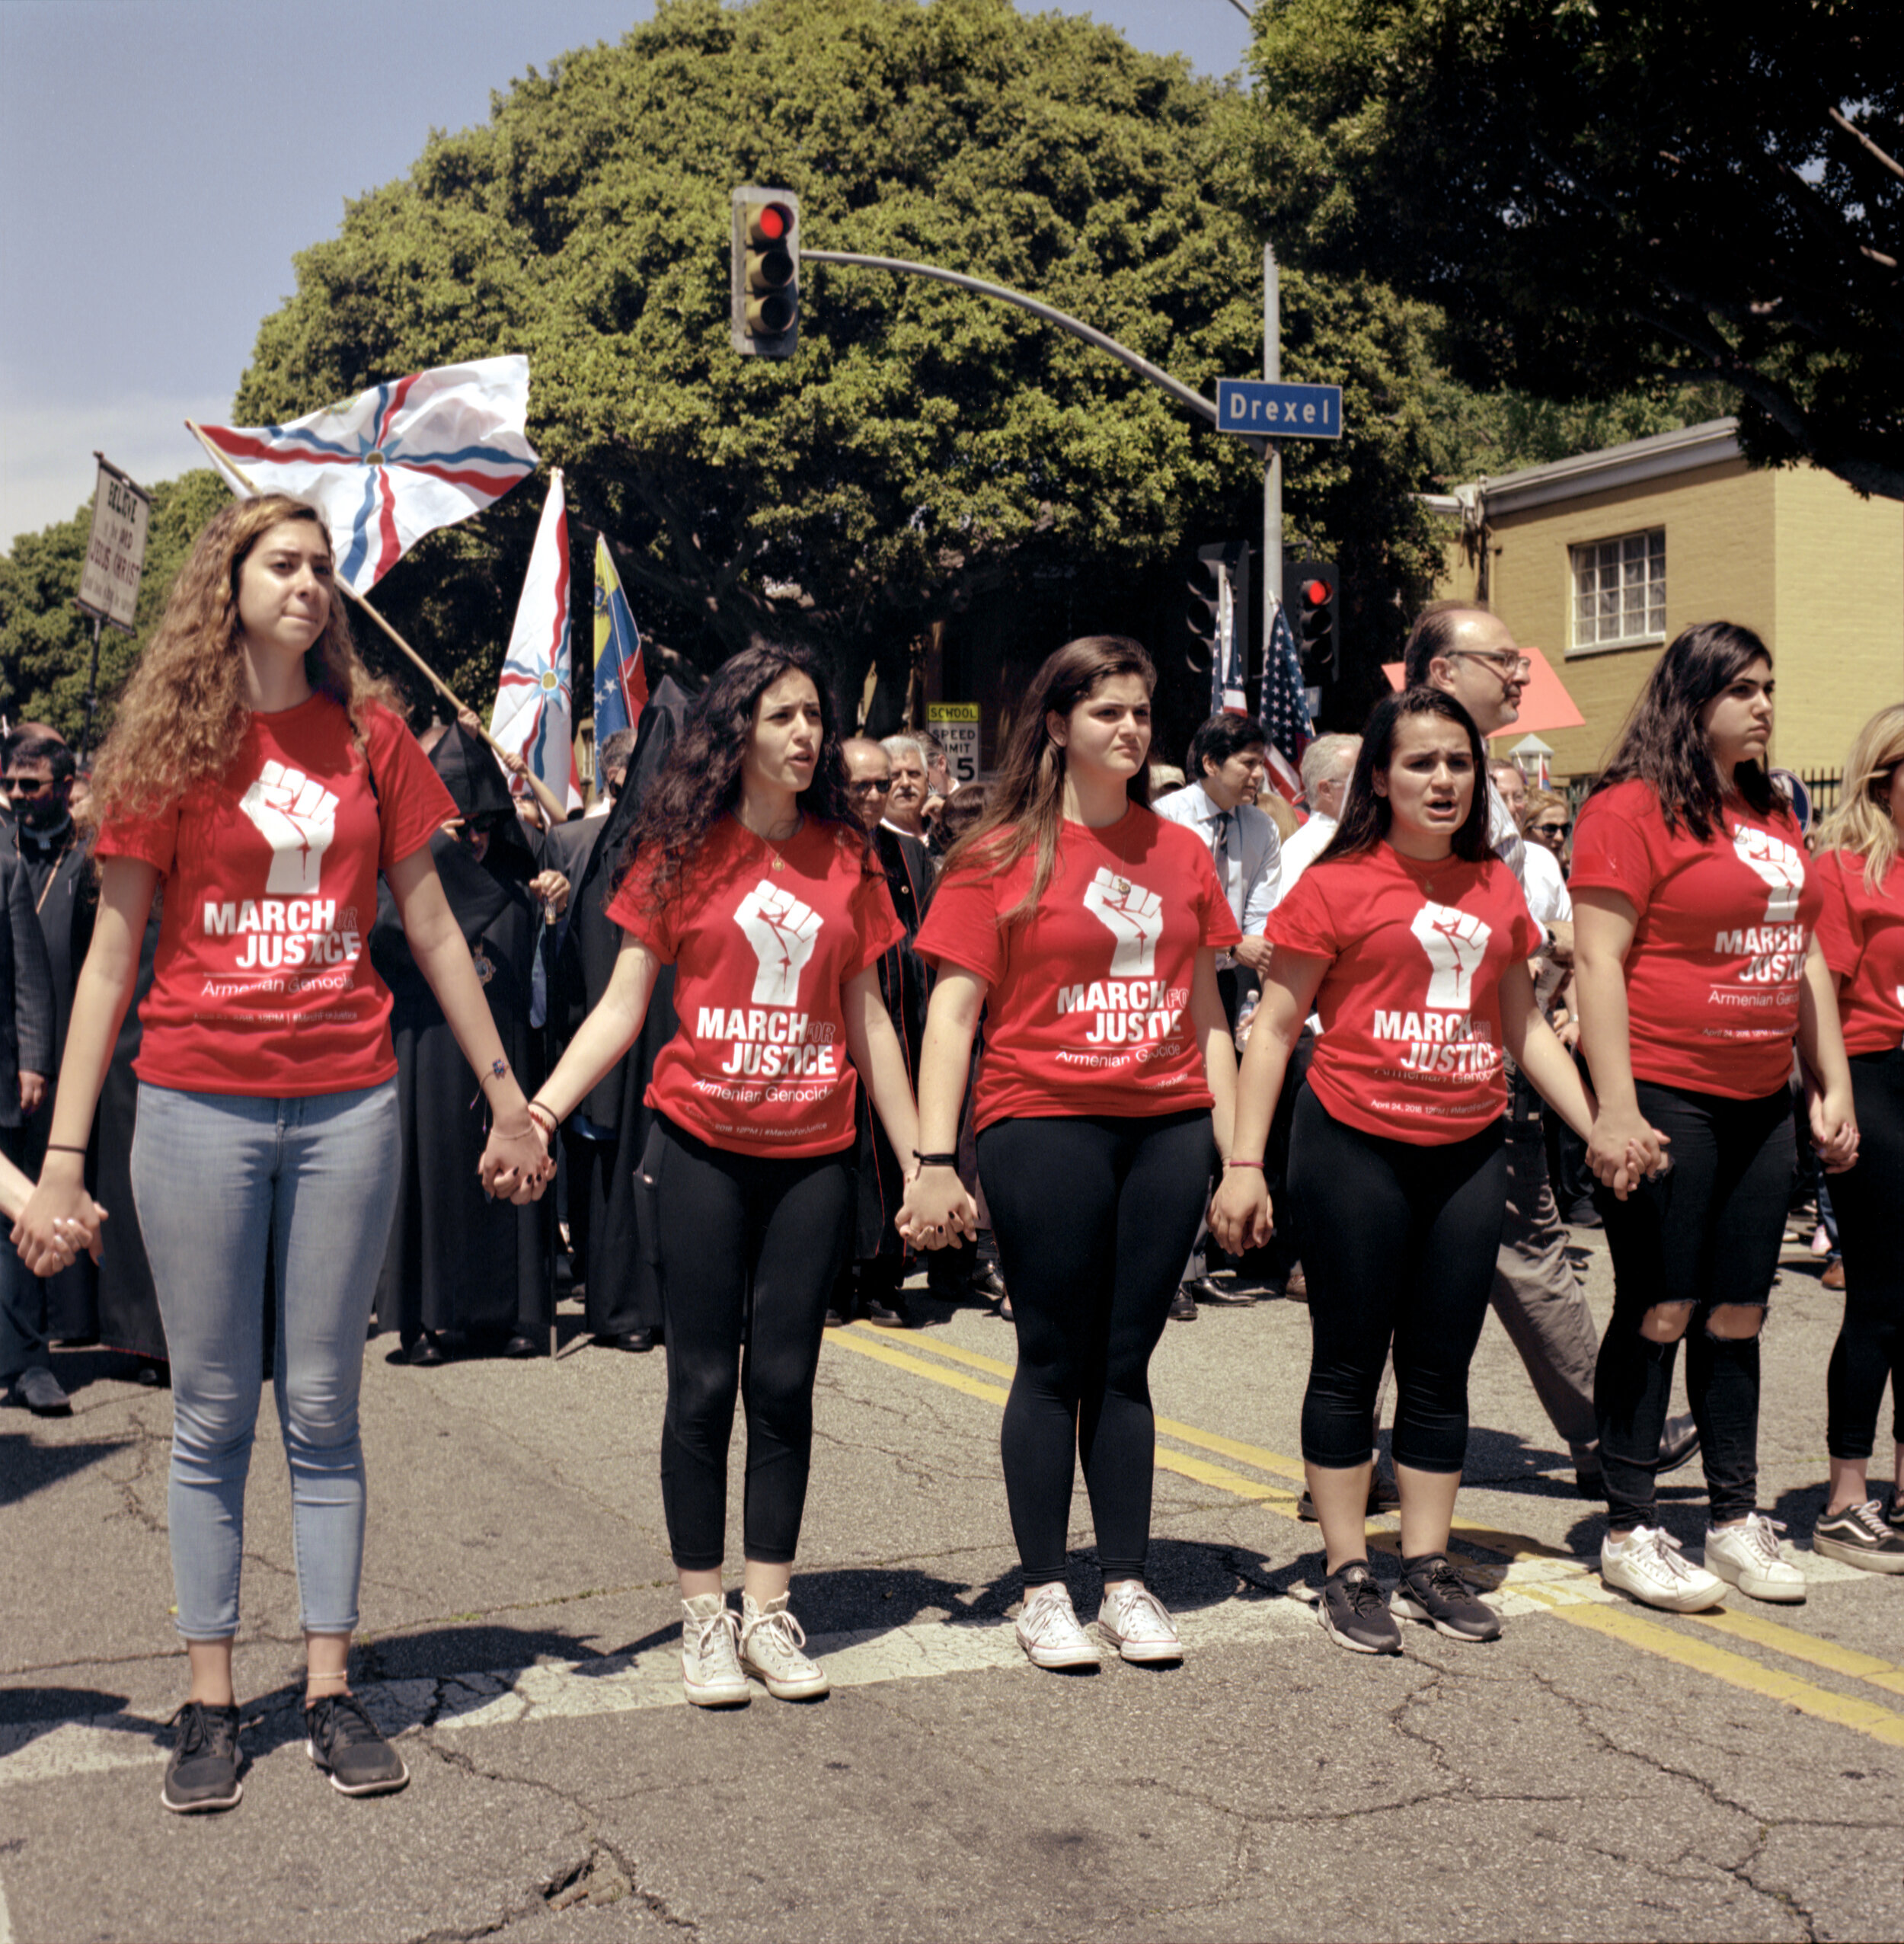  A group of women hold hands at the front of a protest made up of thousands of Armenian-Americans from all over southern California on April 24th, 2018. The group marched from the Little Armenia neighborhood in Hollywood to the Turkish consulate in M